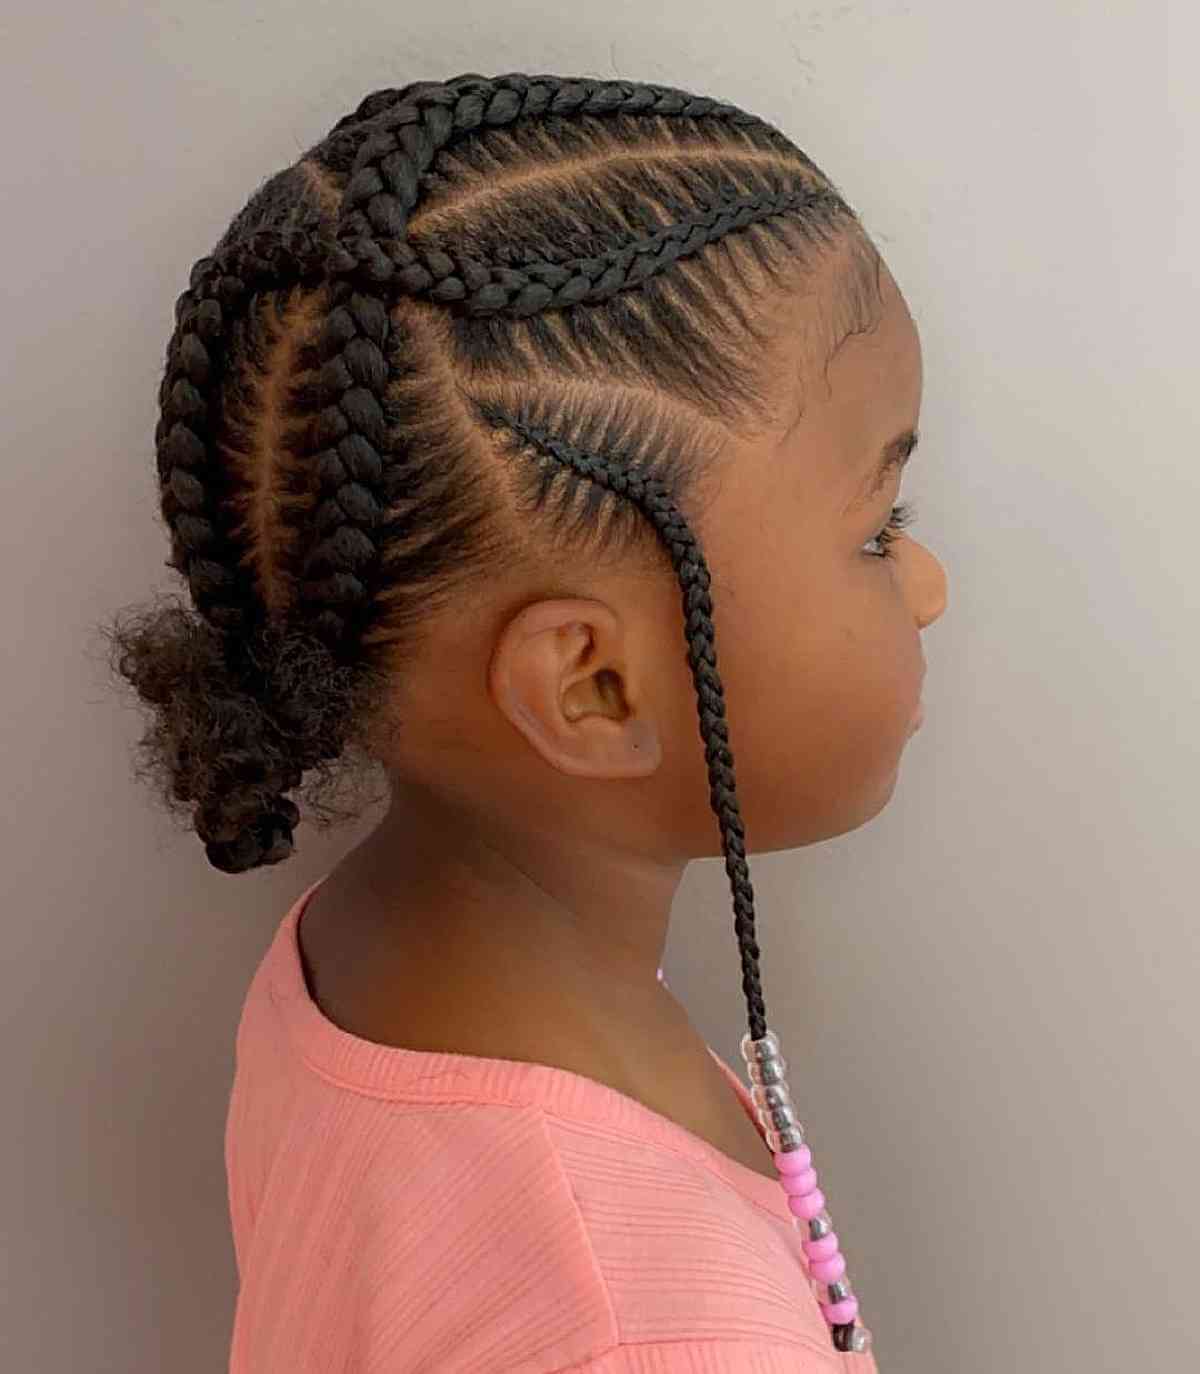 Braid and twist hairstyle for little black girls